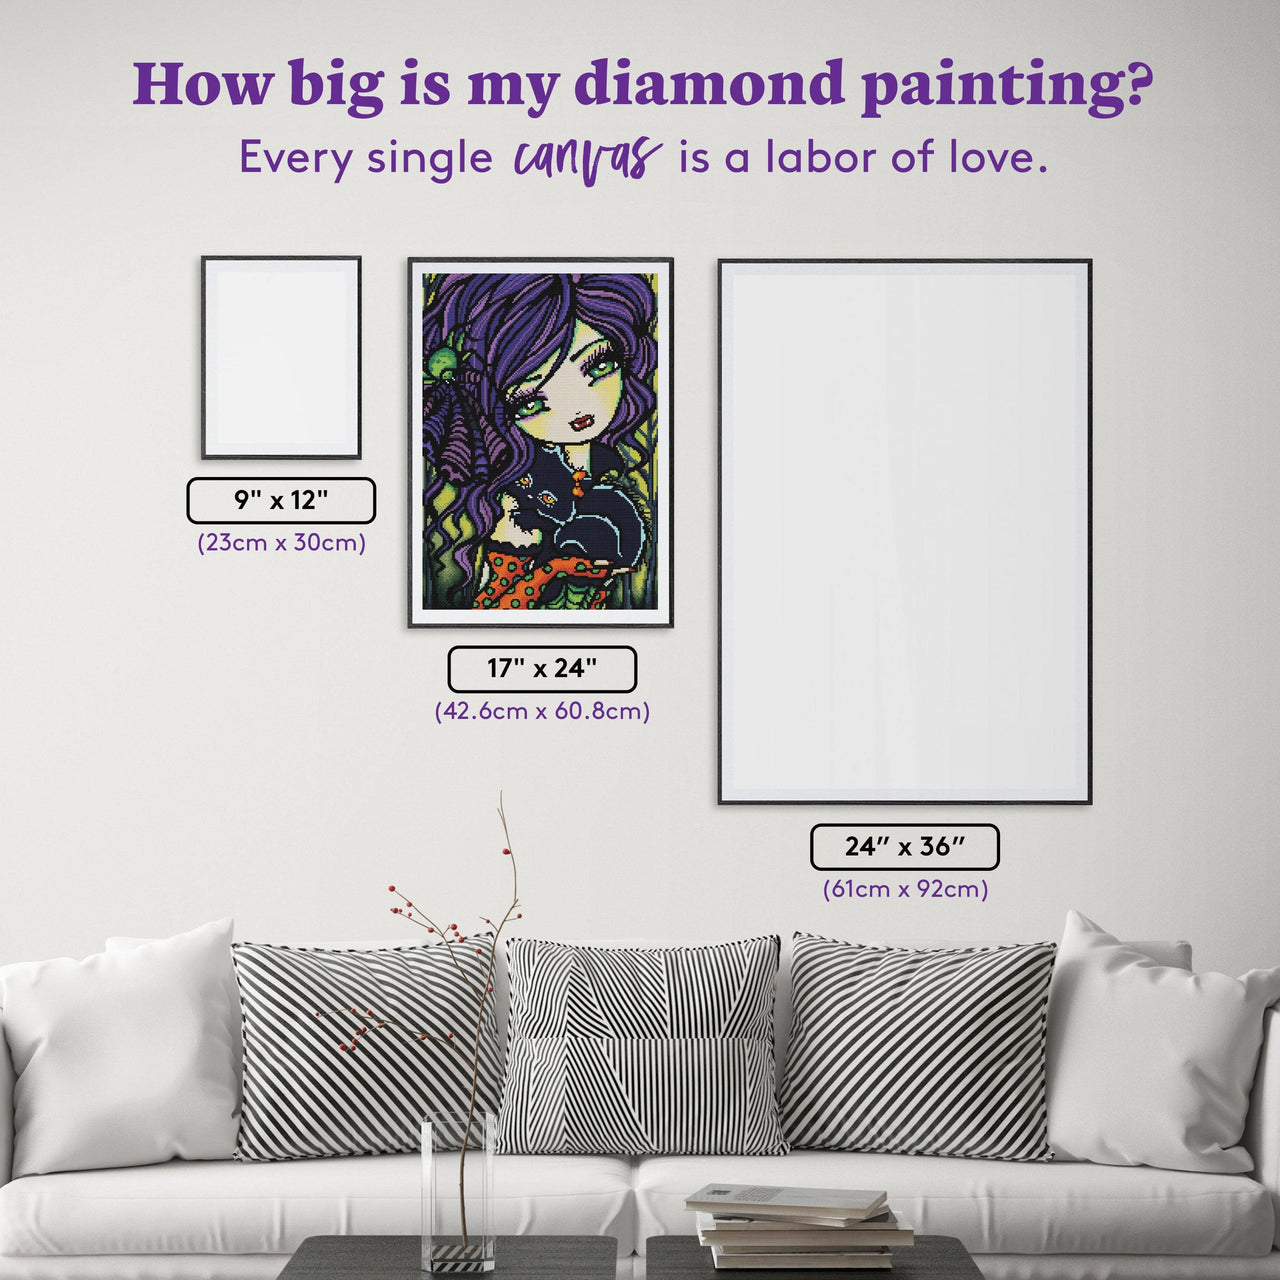 Diamond Painting Vixie 17" x 24" (42.6cm x 60.8cm) / Round with 36 Colors including 4 ABs / 32,984